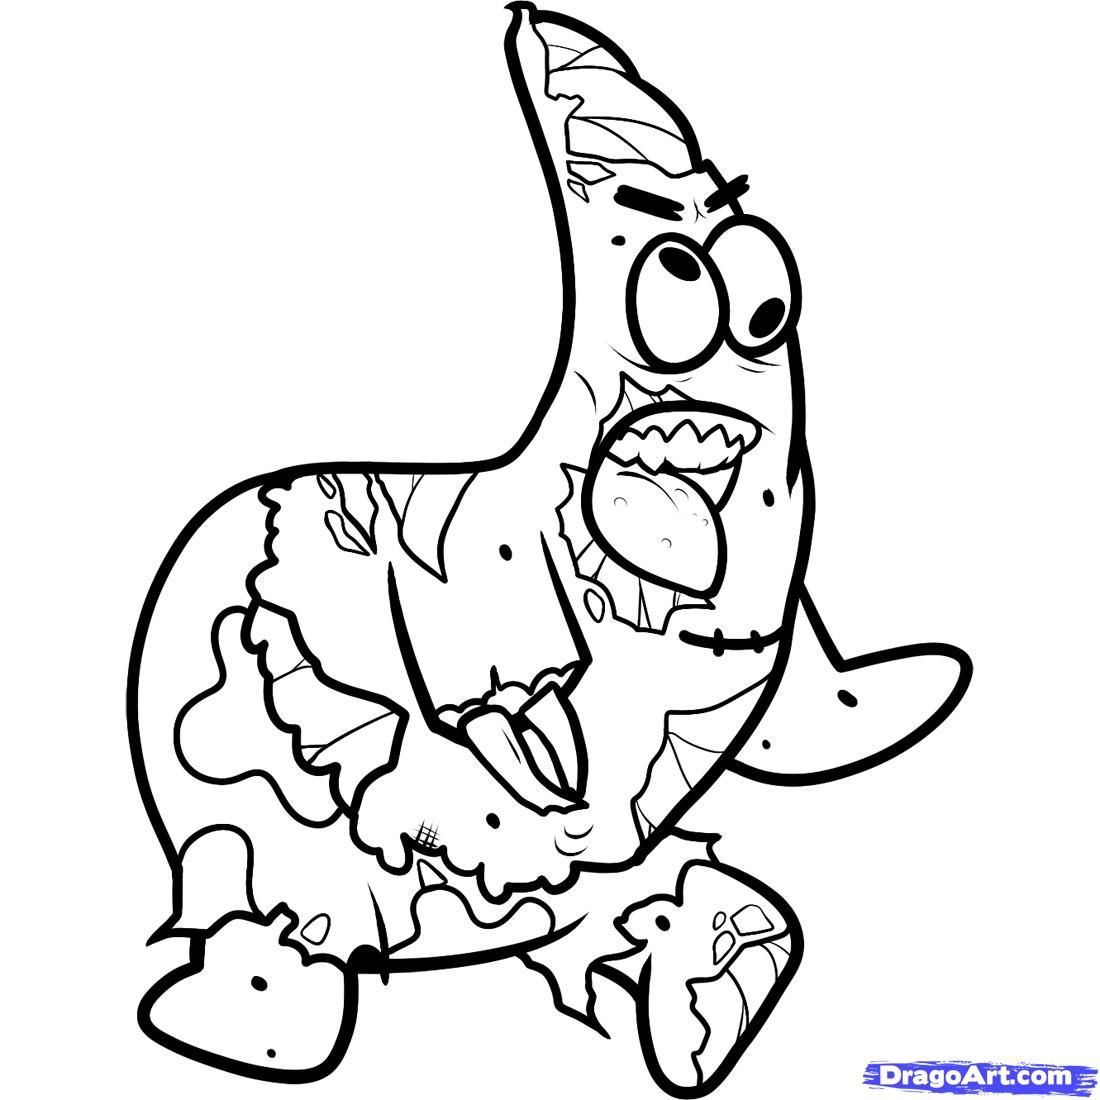 Zombie Coloring Pages For Kids
 11 Pics of Easy Zombie Coloring Page Zombie Spongebob